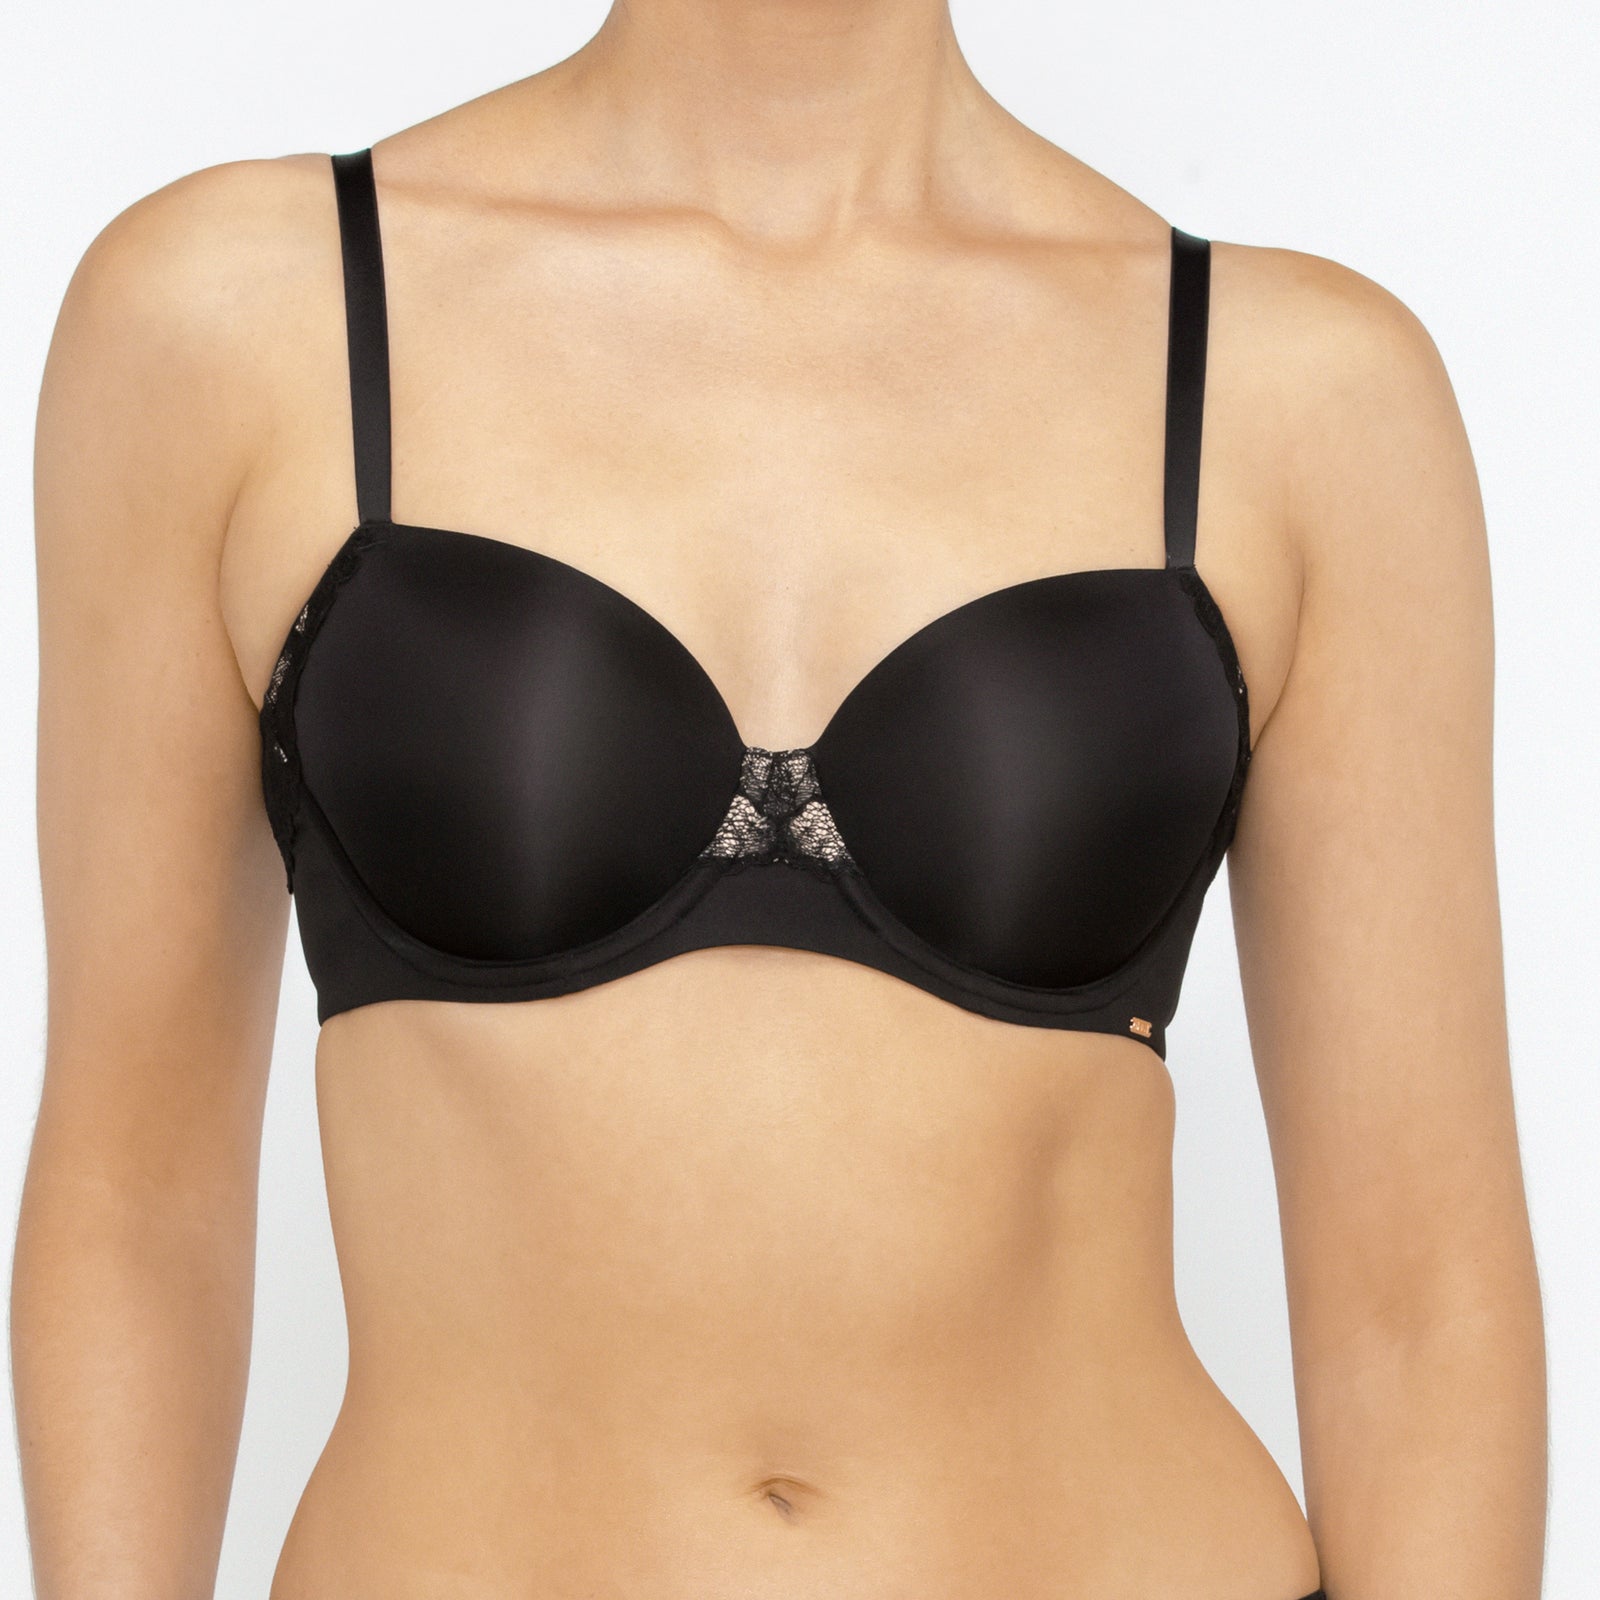 Bra Shopping. The struggles of one who bounces…